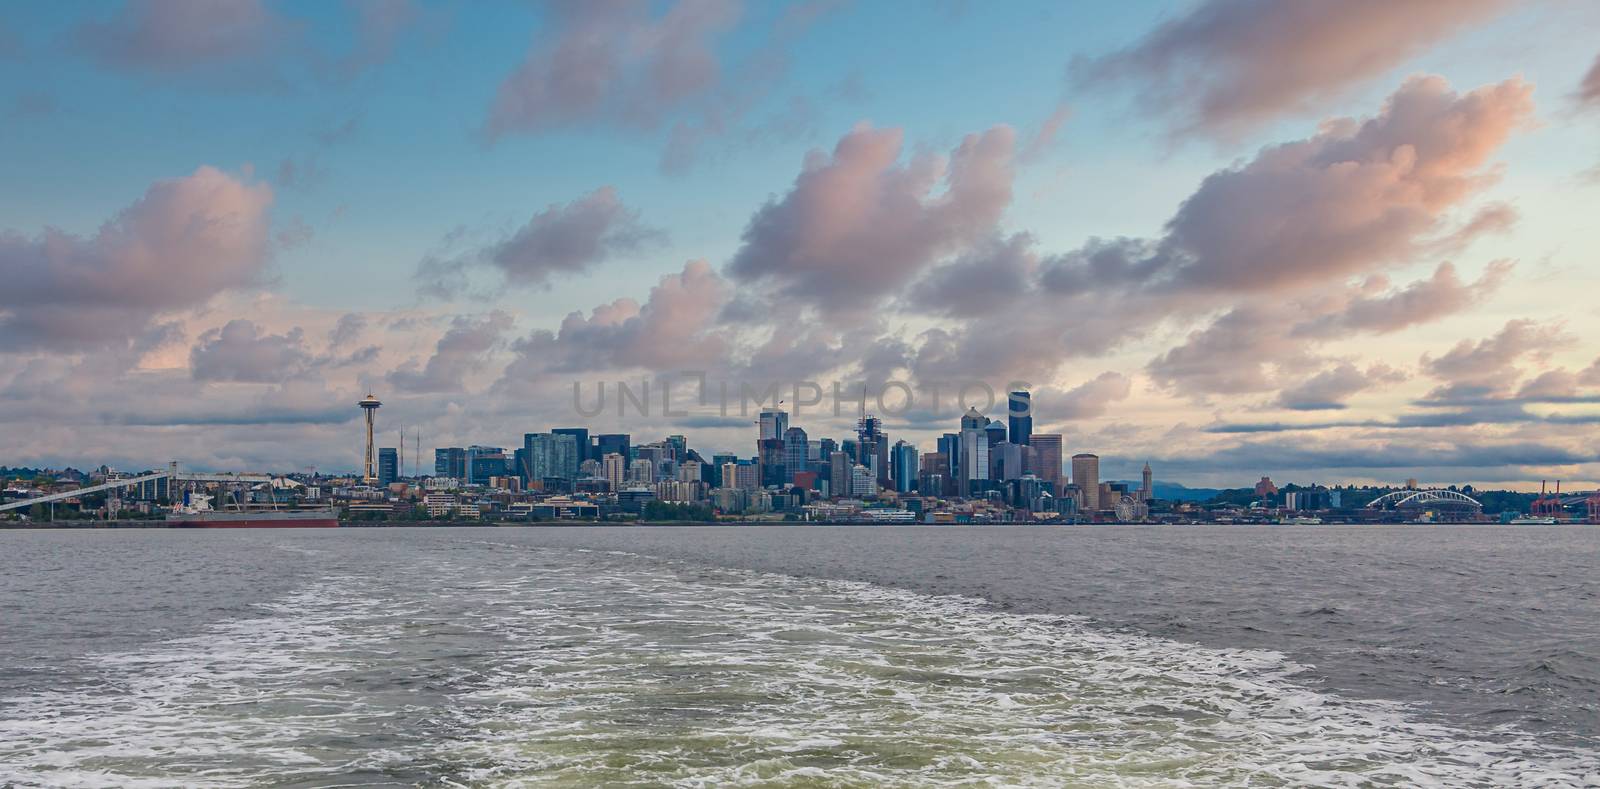 The city of Seattle from Sea Across Wake in Puget Sound